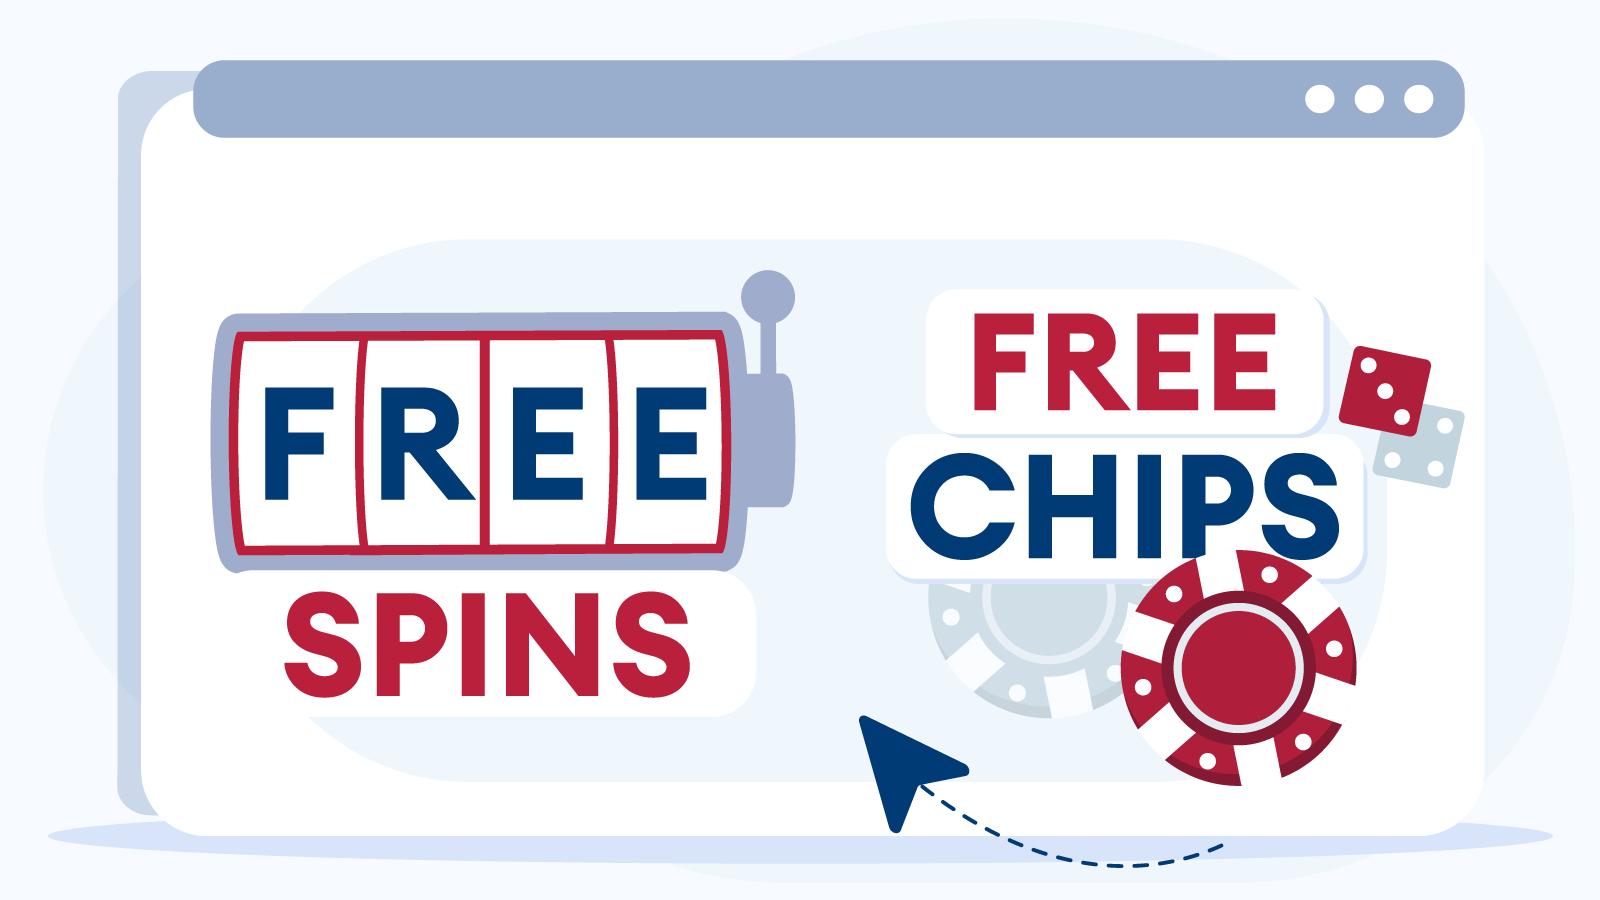 What-Type-is-For-You-Online-Casino-No-Deposit-Bonus-Free-Chips-or-Free-Spins